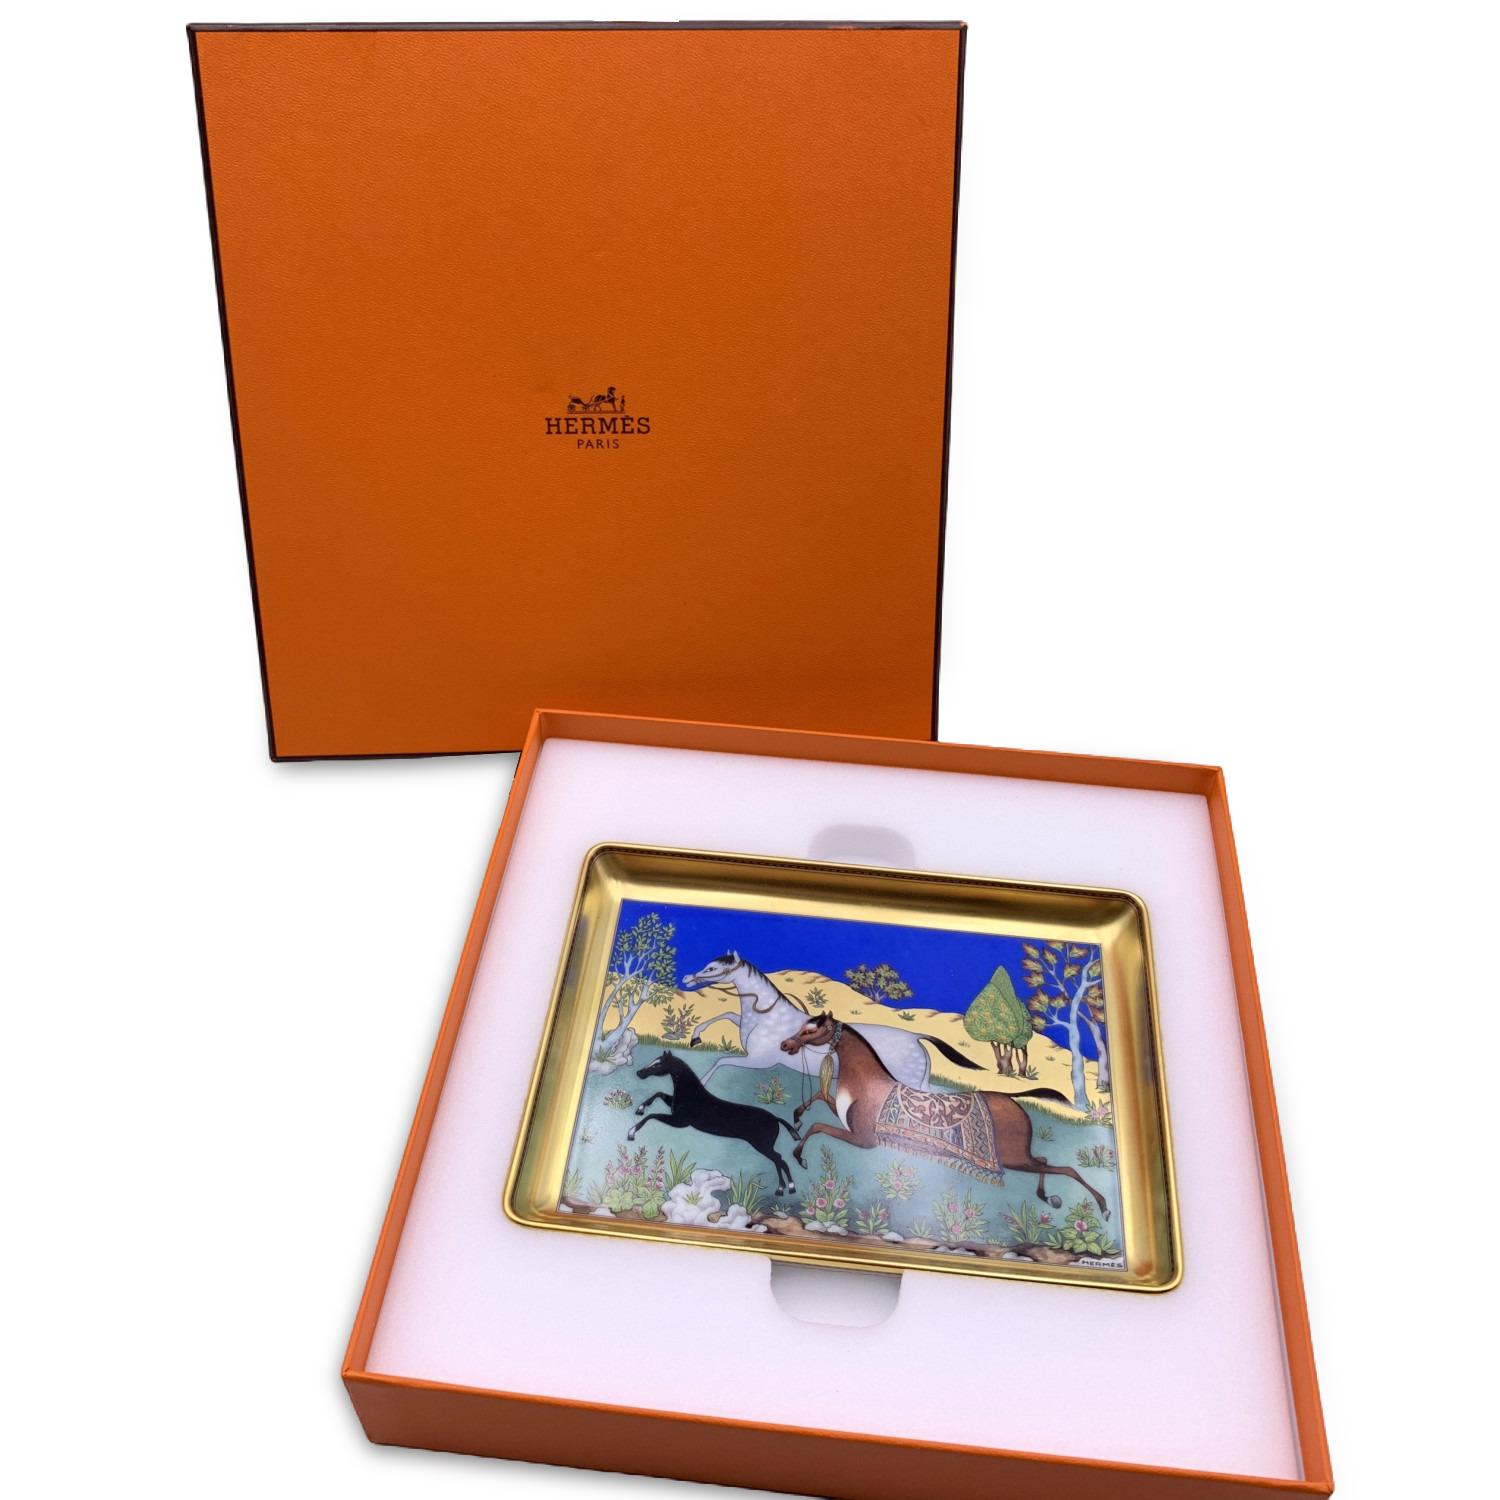 Beuatiful Hermes 'Cheval D'Orient' Sushi Plate/Tray. Small model. White porcelain with beautiful horses design inspired by Persian art. Gold border. Marked with 'Hermes Porcelain Paris' and 'Made in France' writings on the bottom.